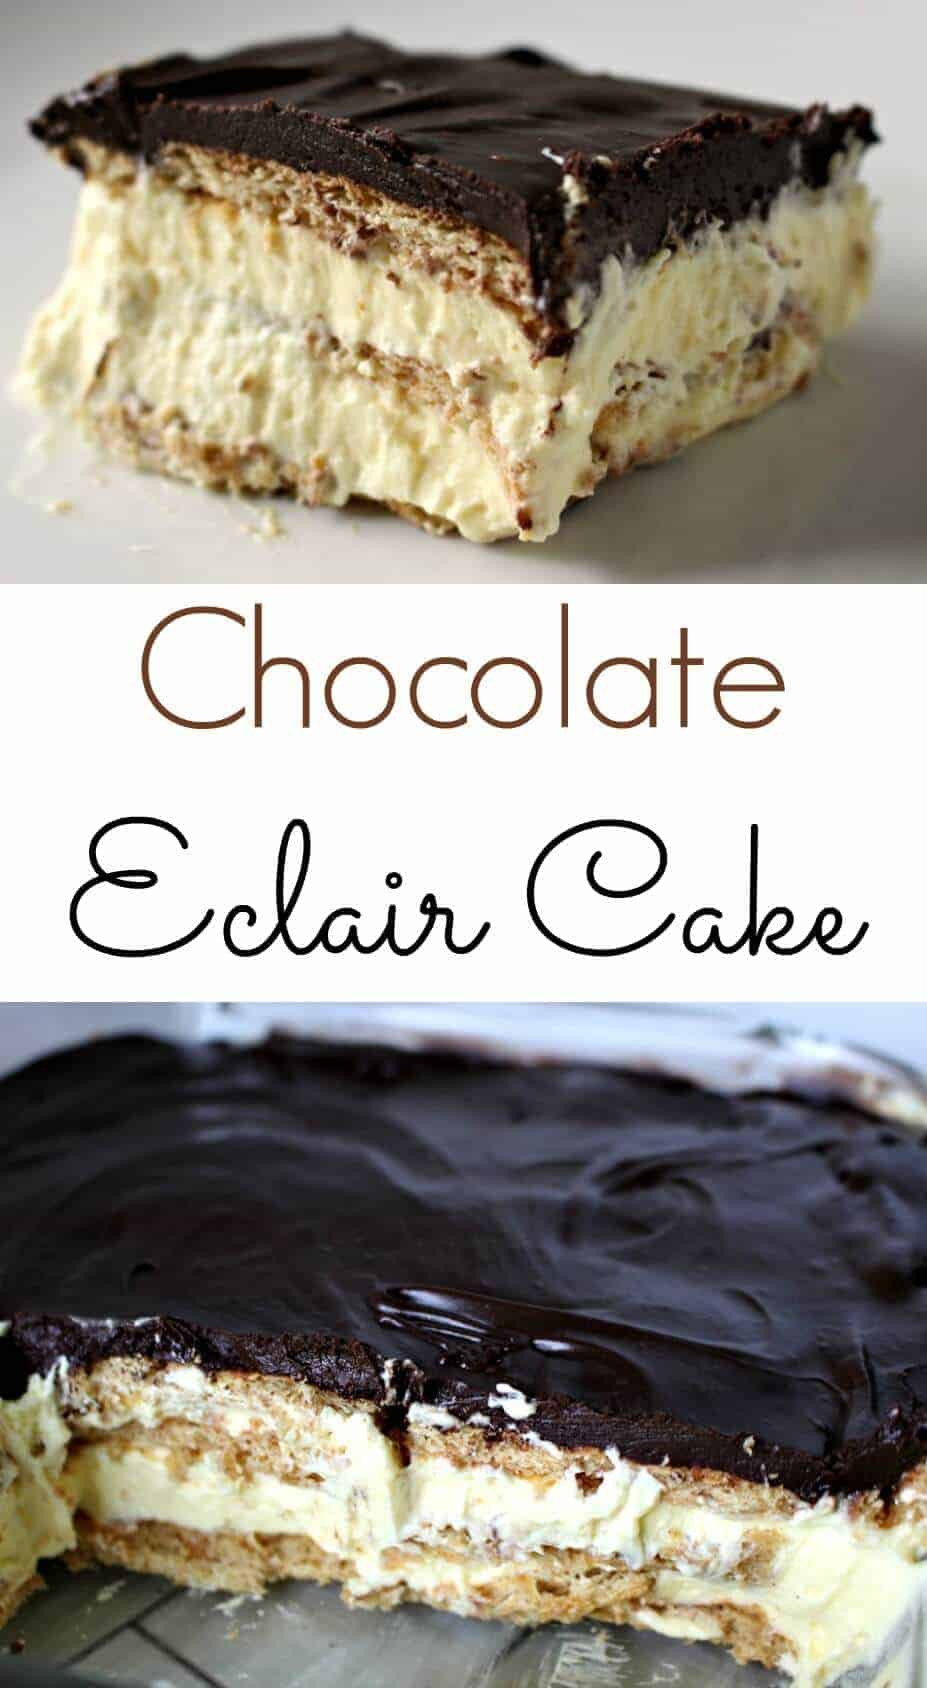 Easy Desserts Recipe No Bake
 The Easiest Eclair Cake The Perfect No Bake Dessert